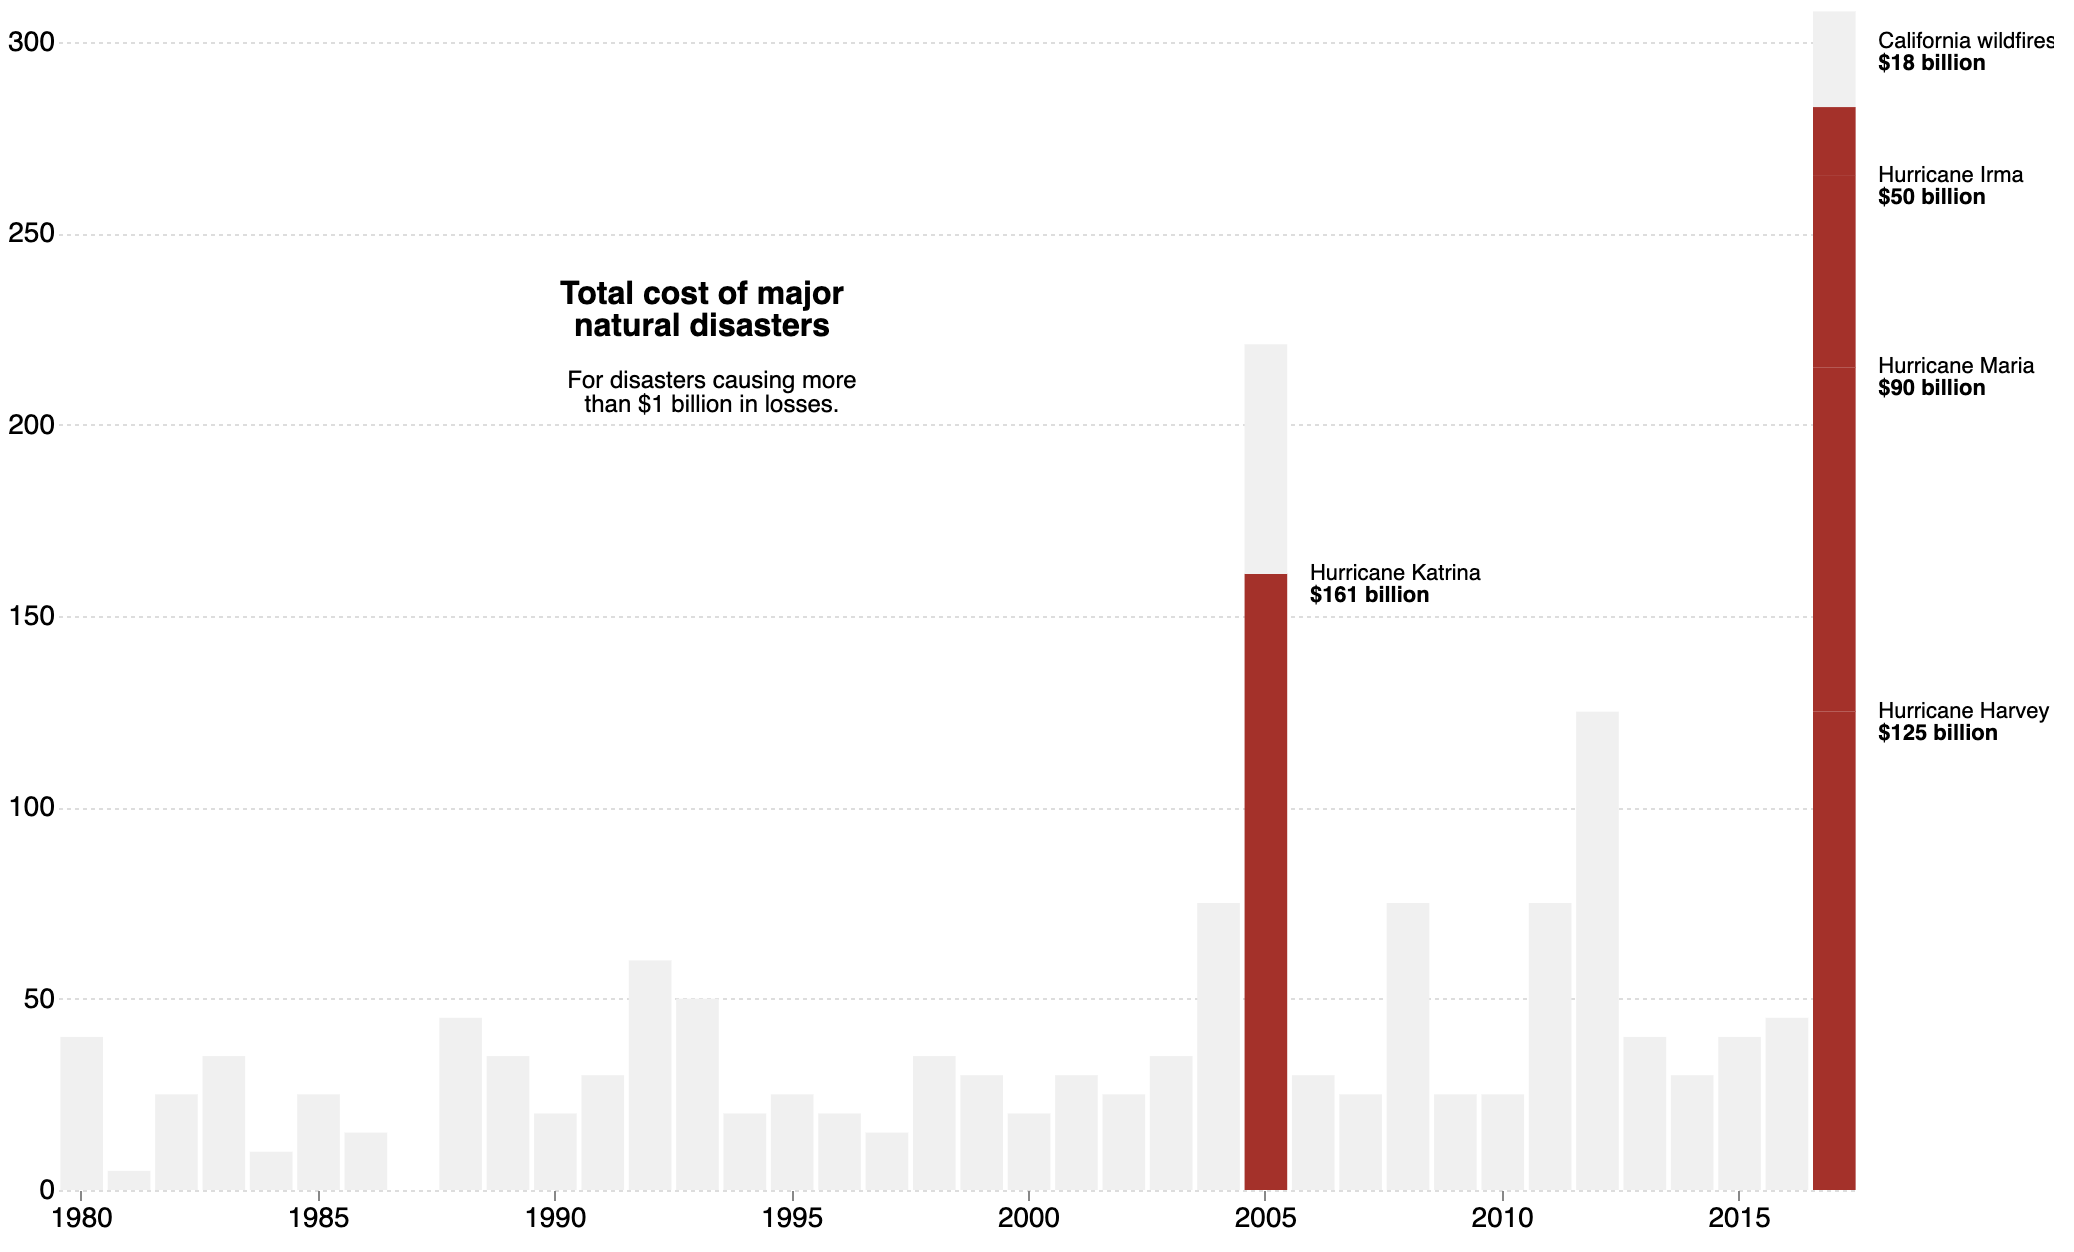 A bar chart showing the Total cost of major natural disasters over the 1980 - 2017 period. The biggest 5 disasters are labelled: with their names and total cost